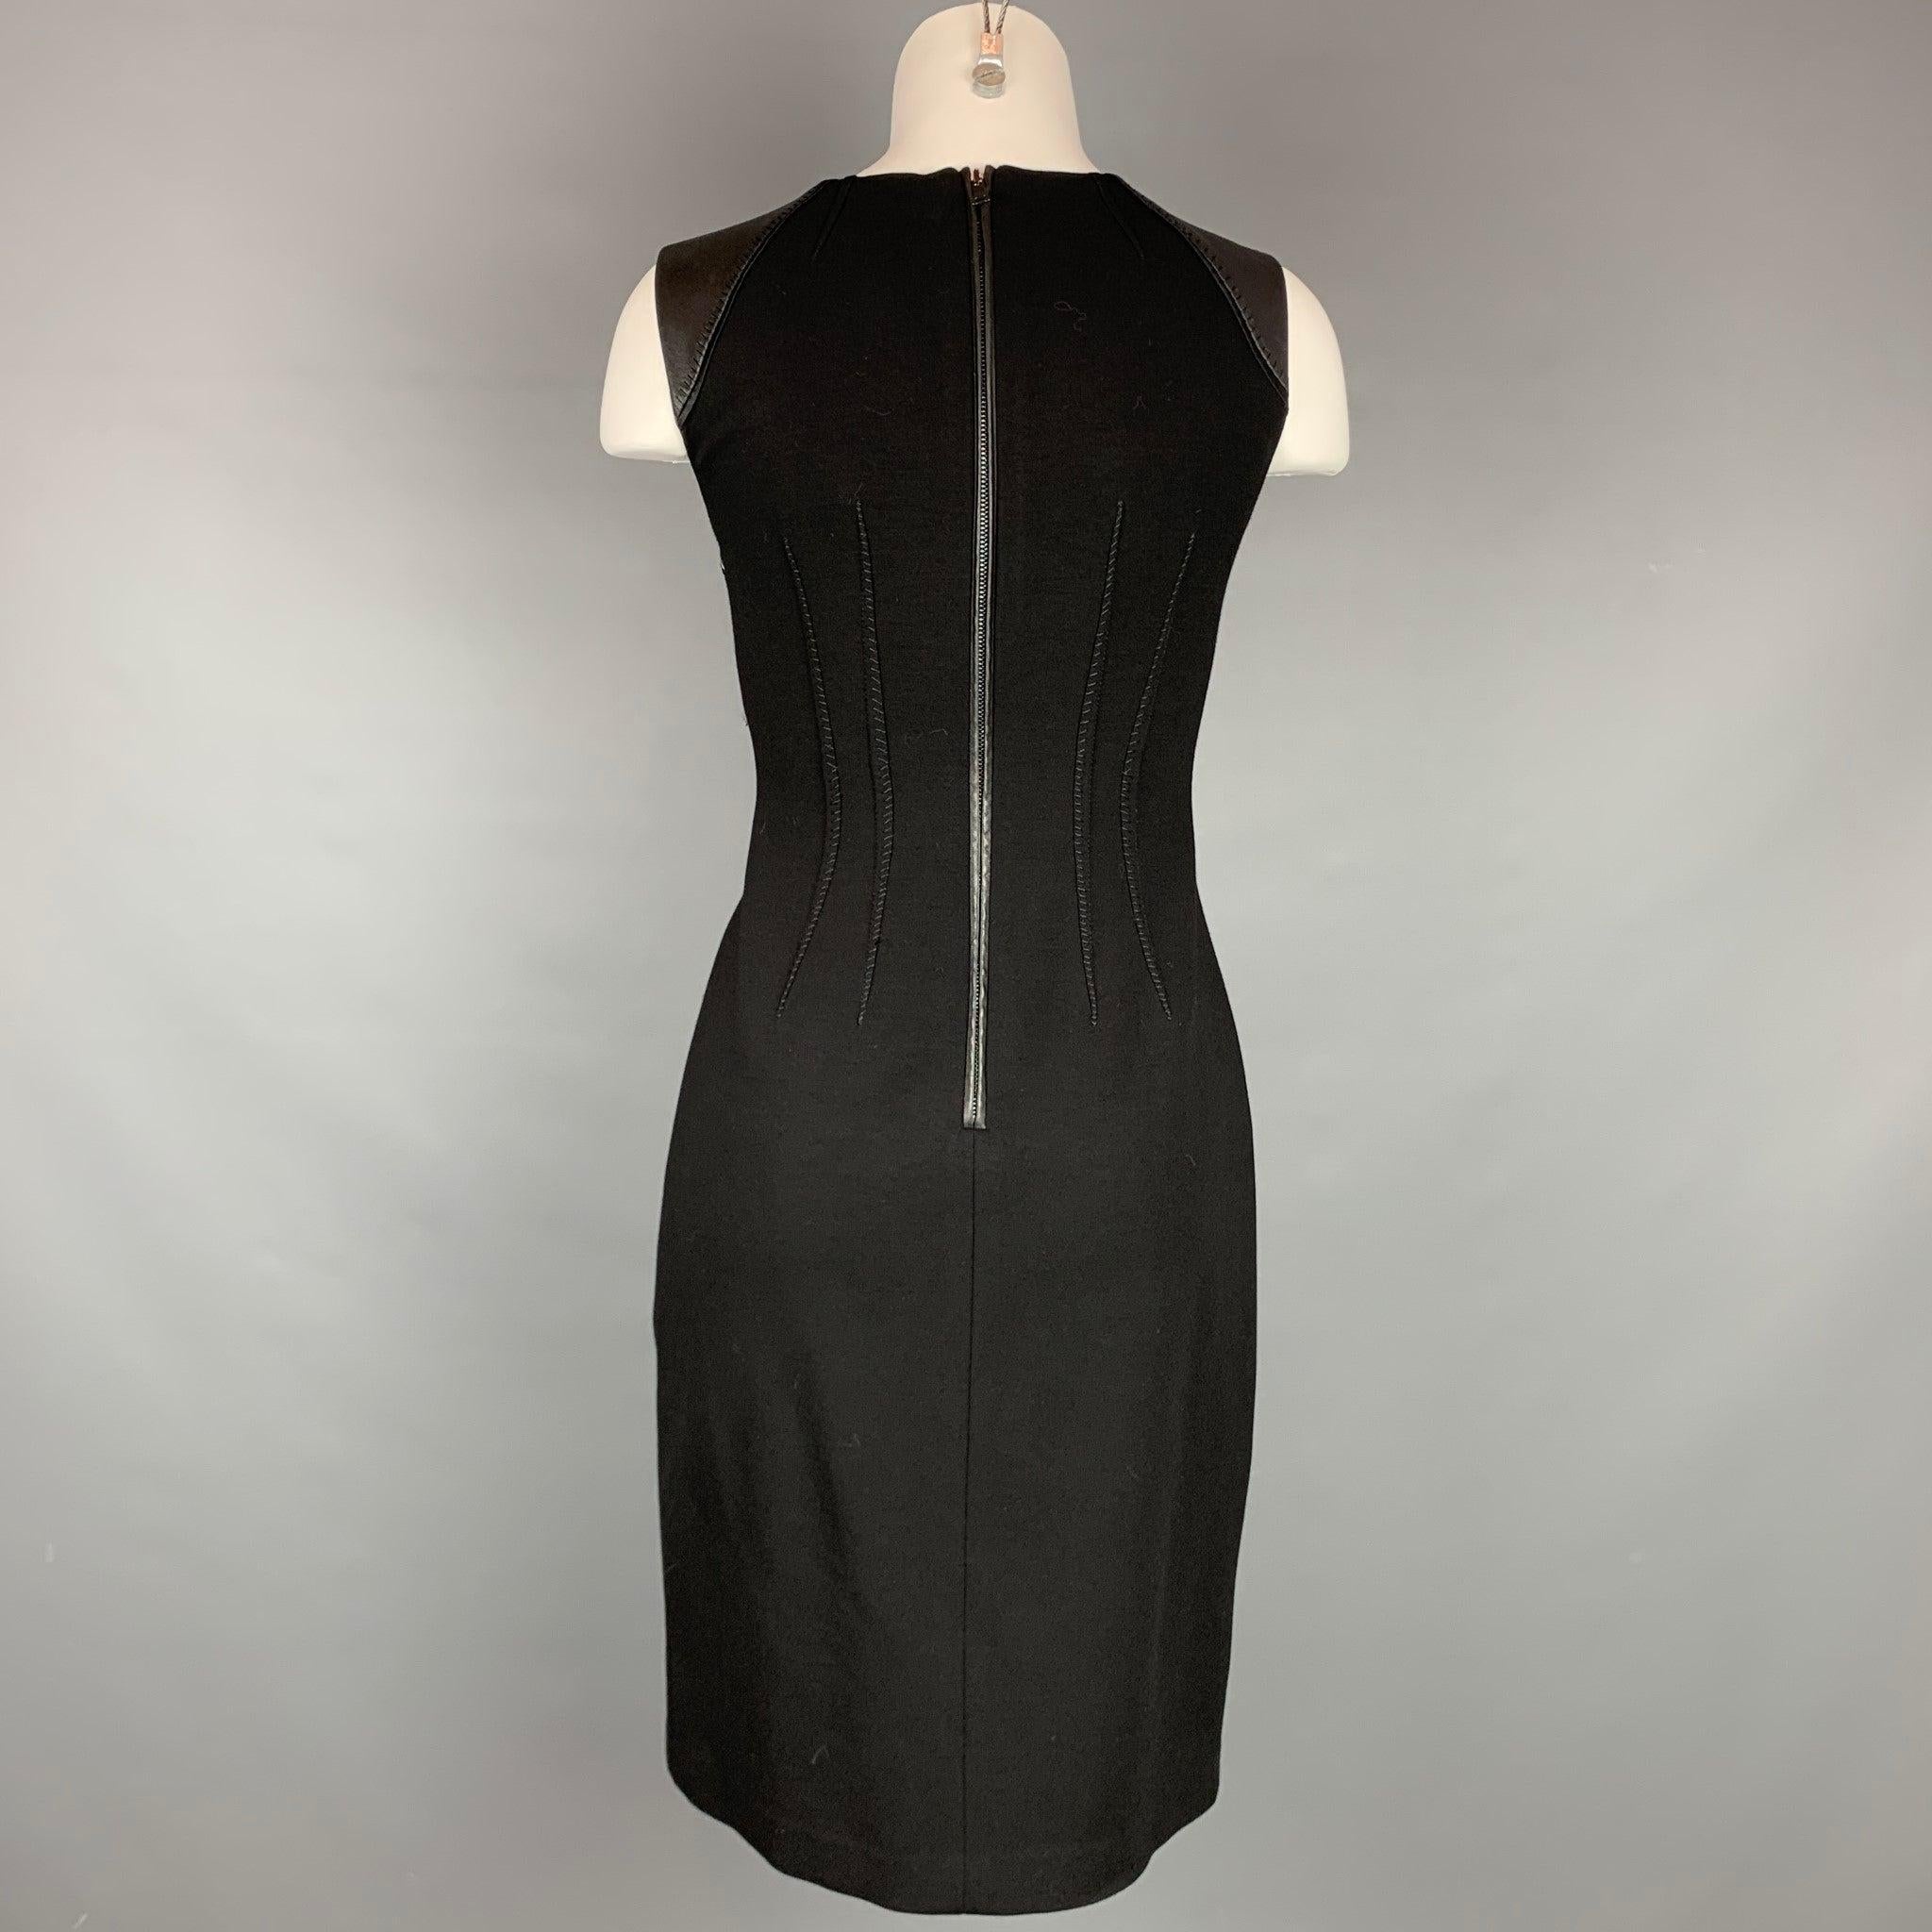 ELIE TAHARI Size 0 Black Viscose Blend Sleeveless Shift Dress In Good Condition For Sale In San Francisco, CA